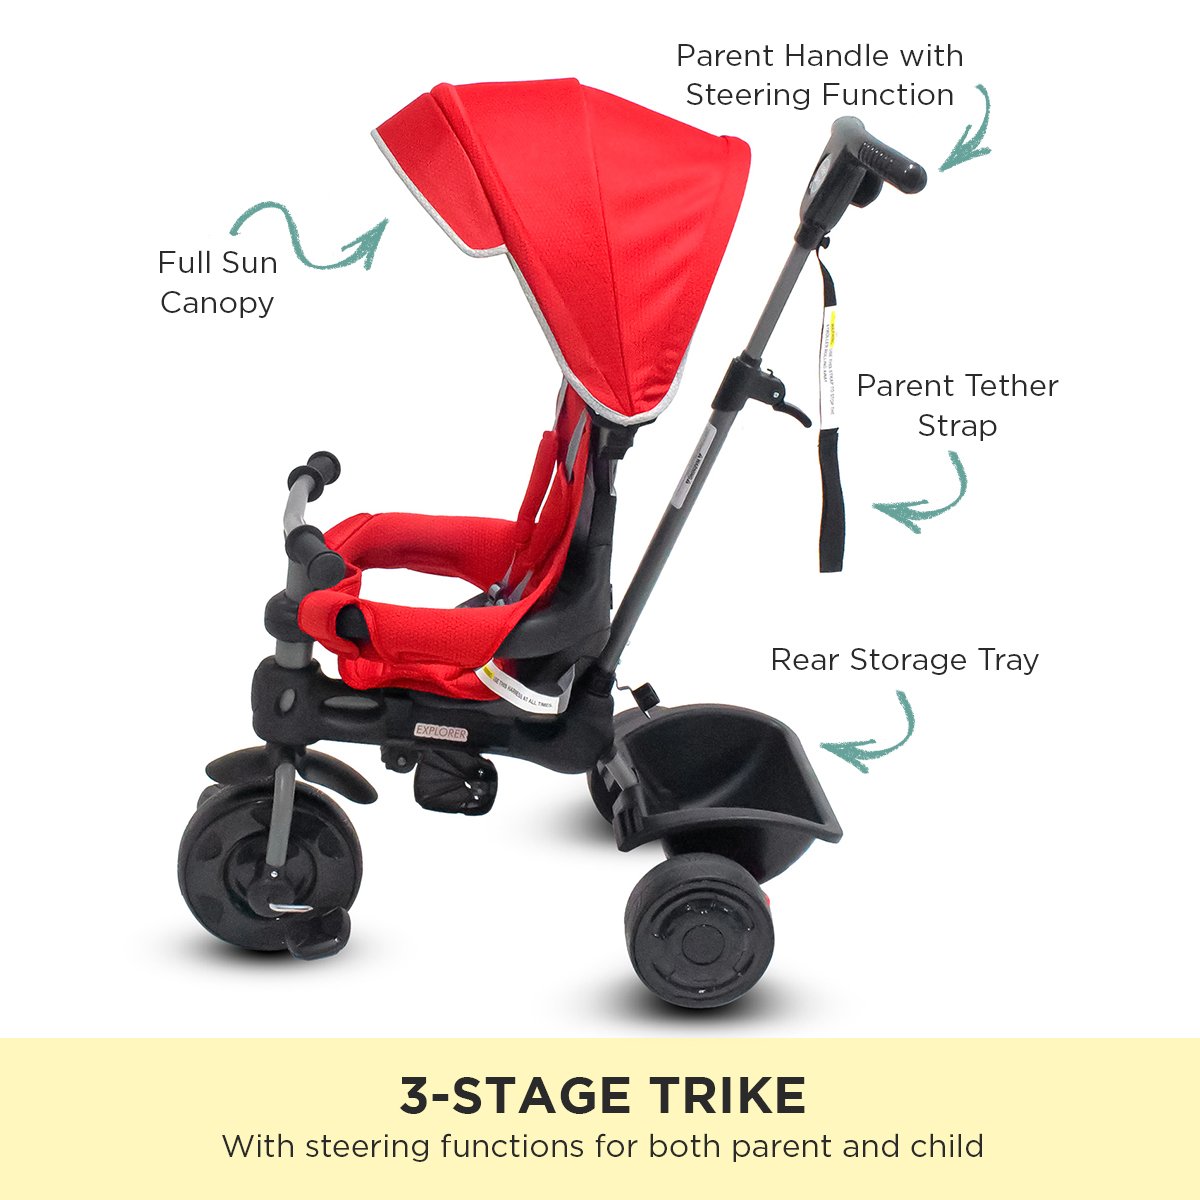 Veebee Explorer 3-stage Kids Trike With Canopy - Red - SILBERSHELL